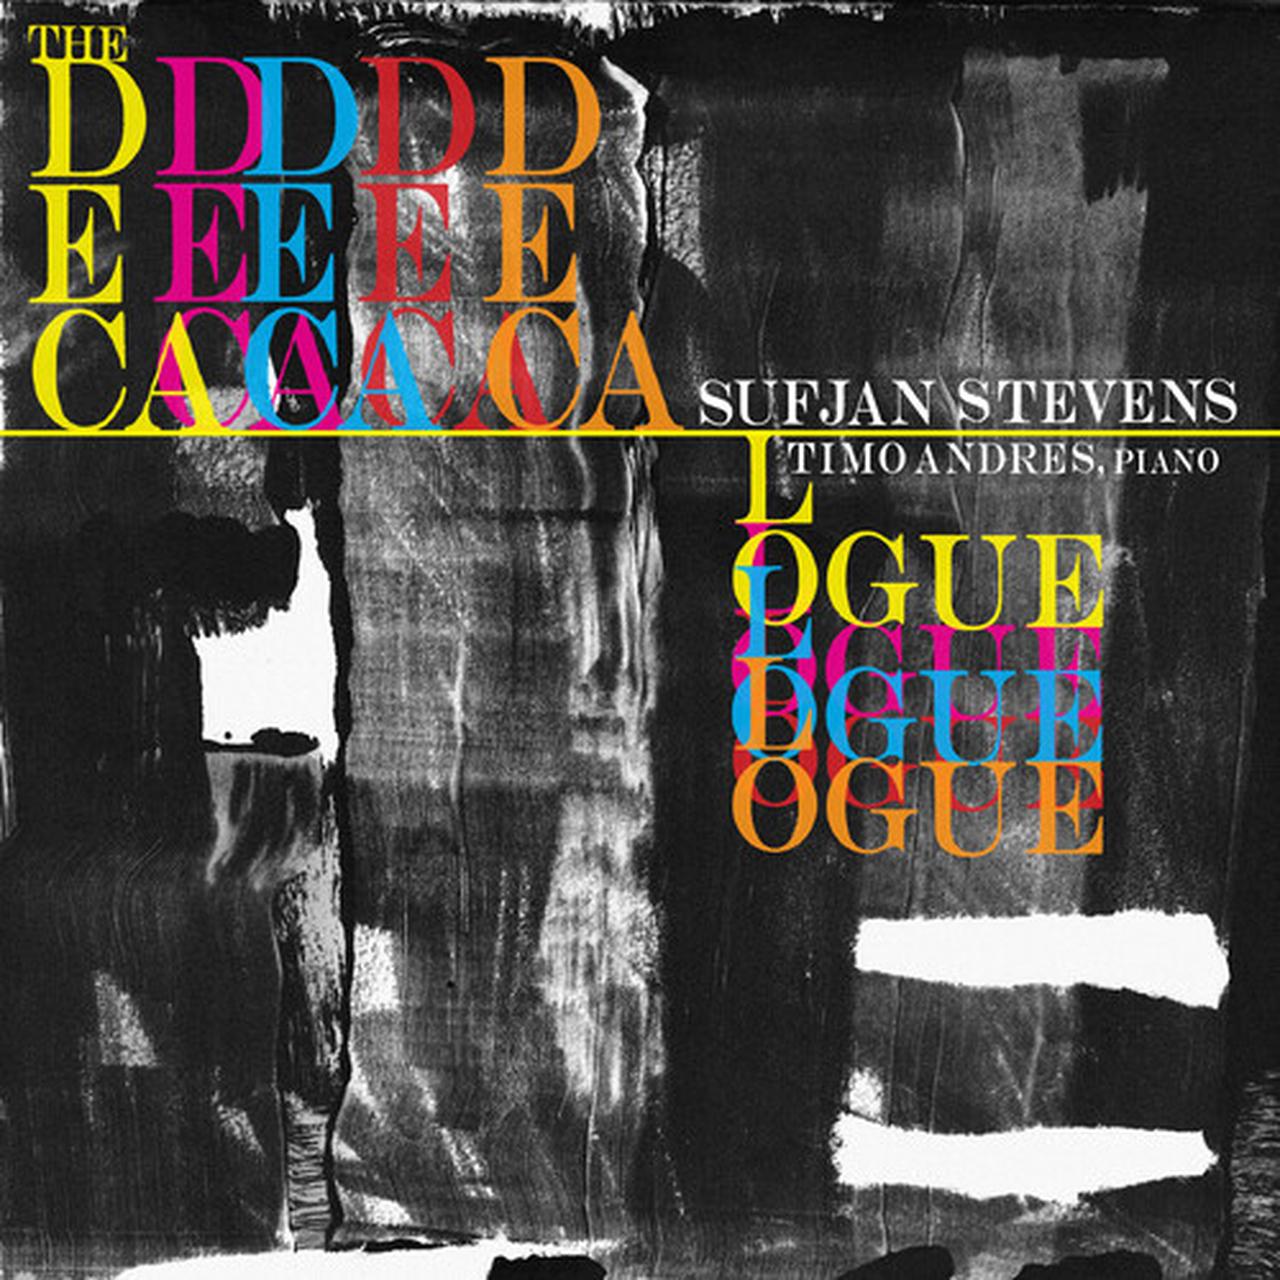 Selected image for SUFIAN STEVENS - The Decalouge